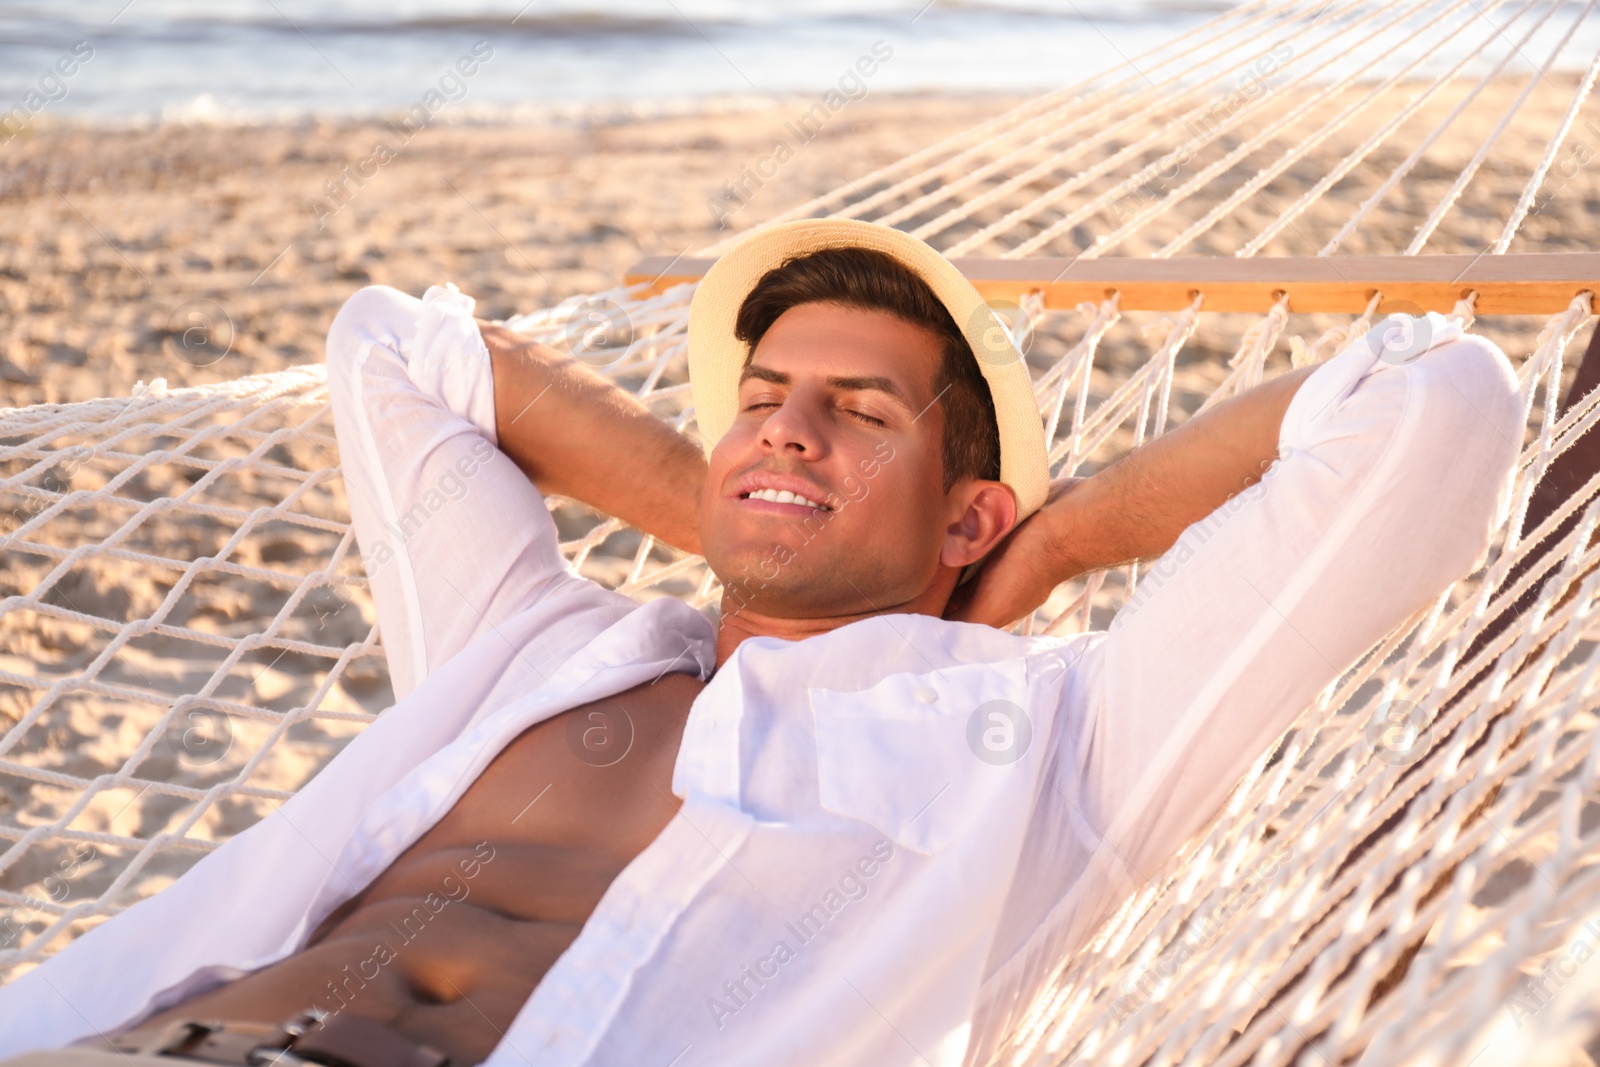 Photo of Man relaxing in hammock on beach. Summer vacation